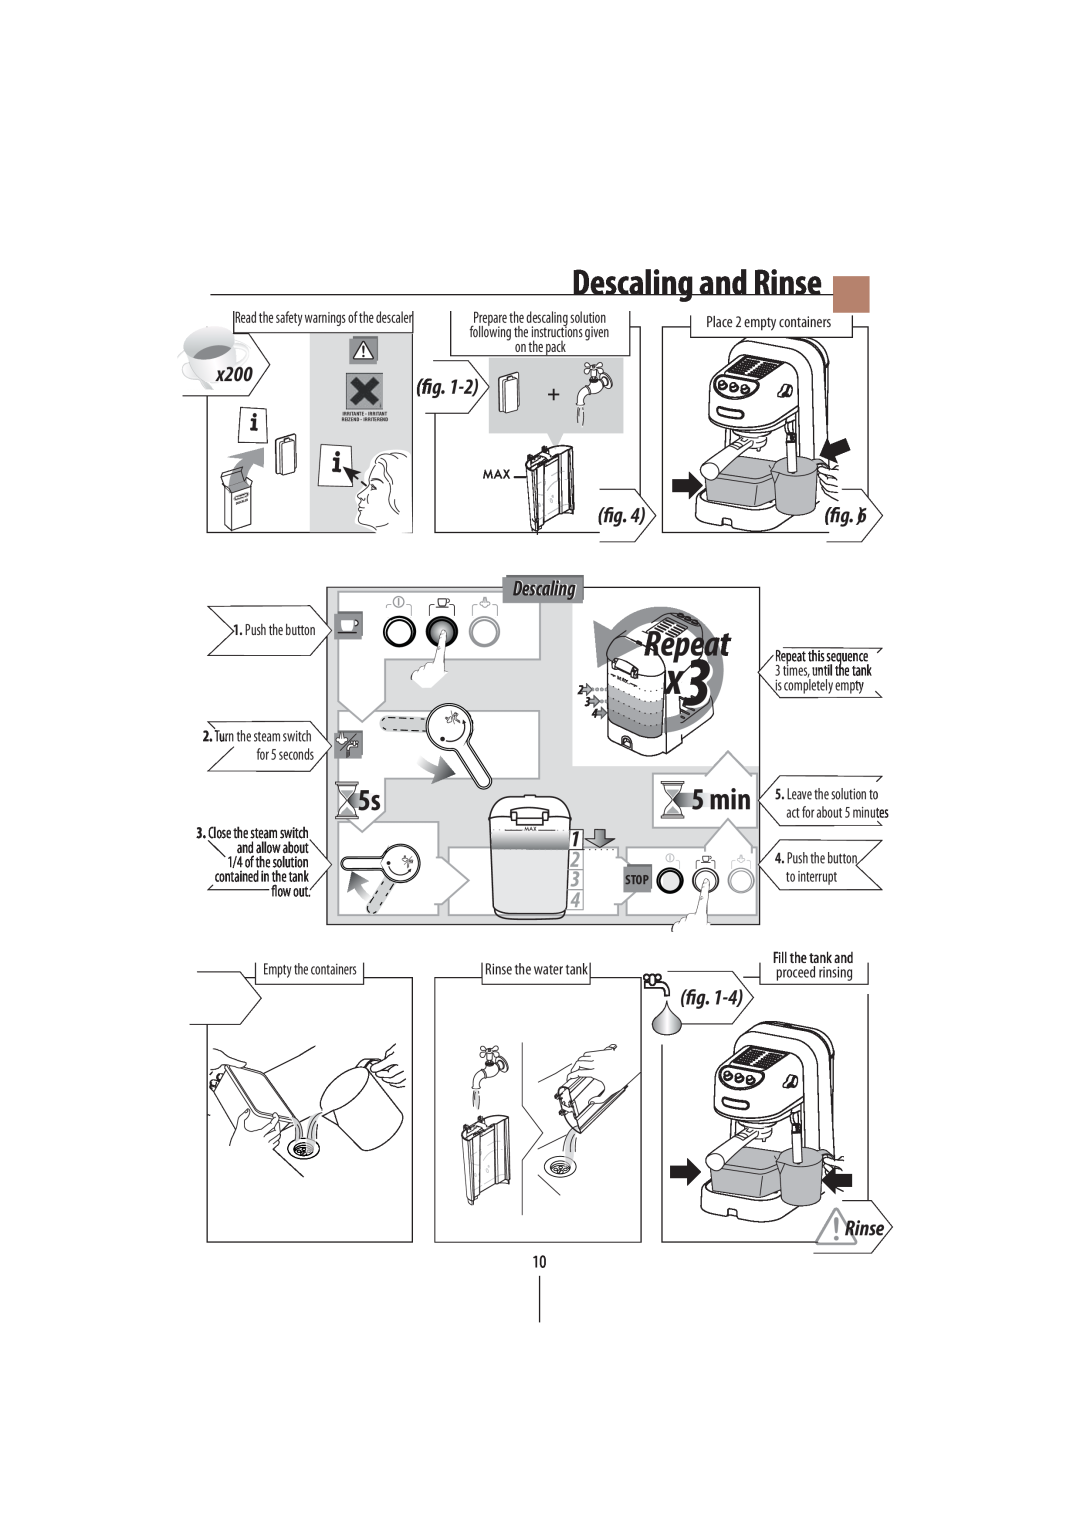 DeLonghi EC250 Descaling and Rinse, Repeat, x200, Prepare the descaling solution, Stop, following the instructions given 